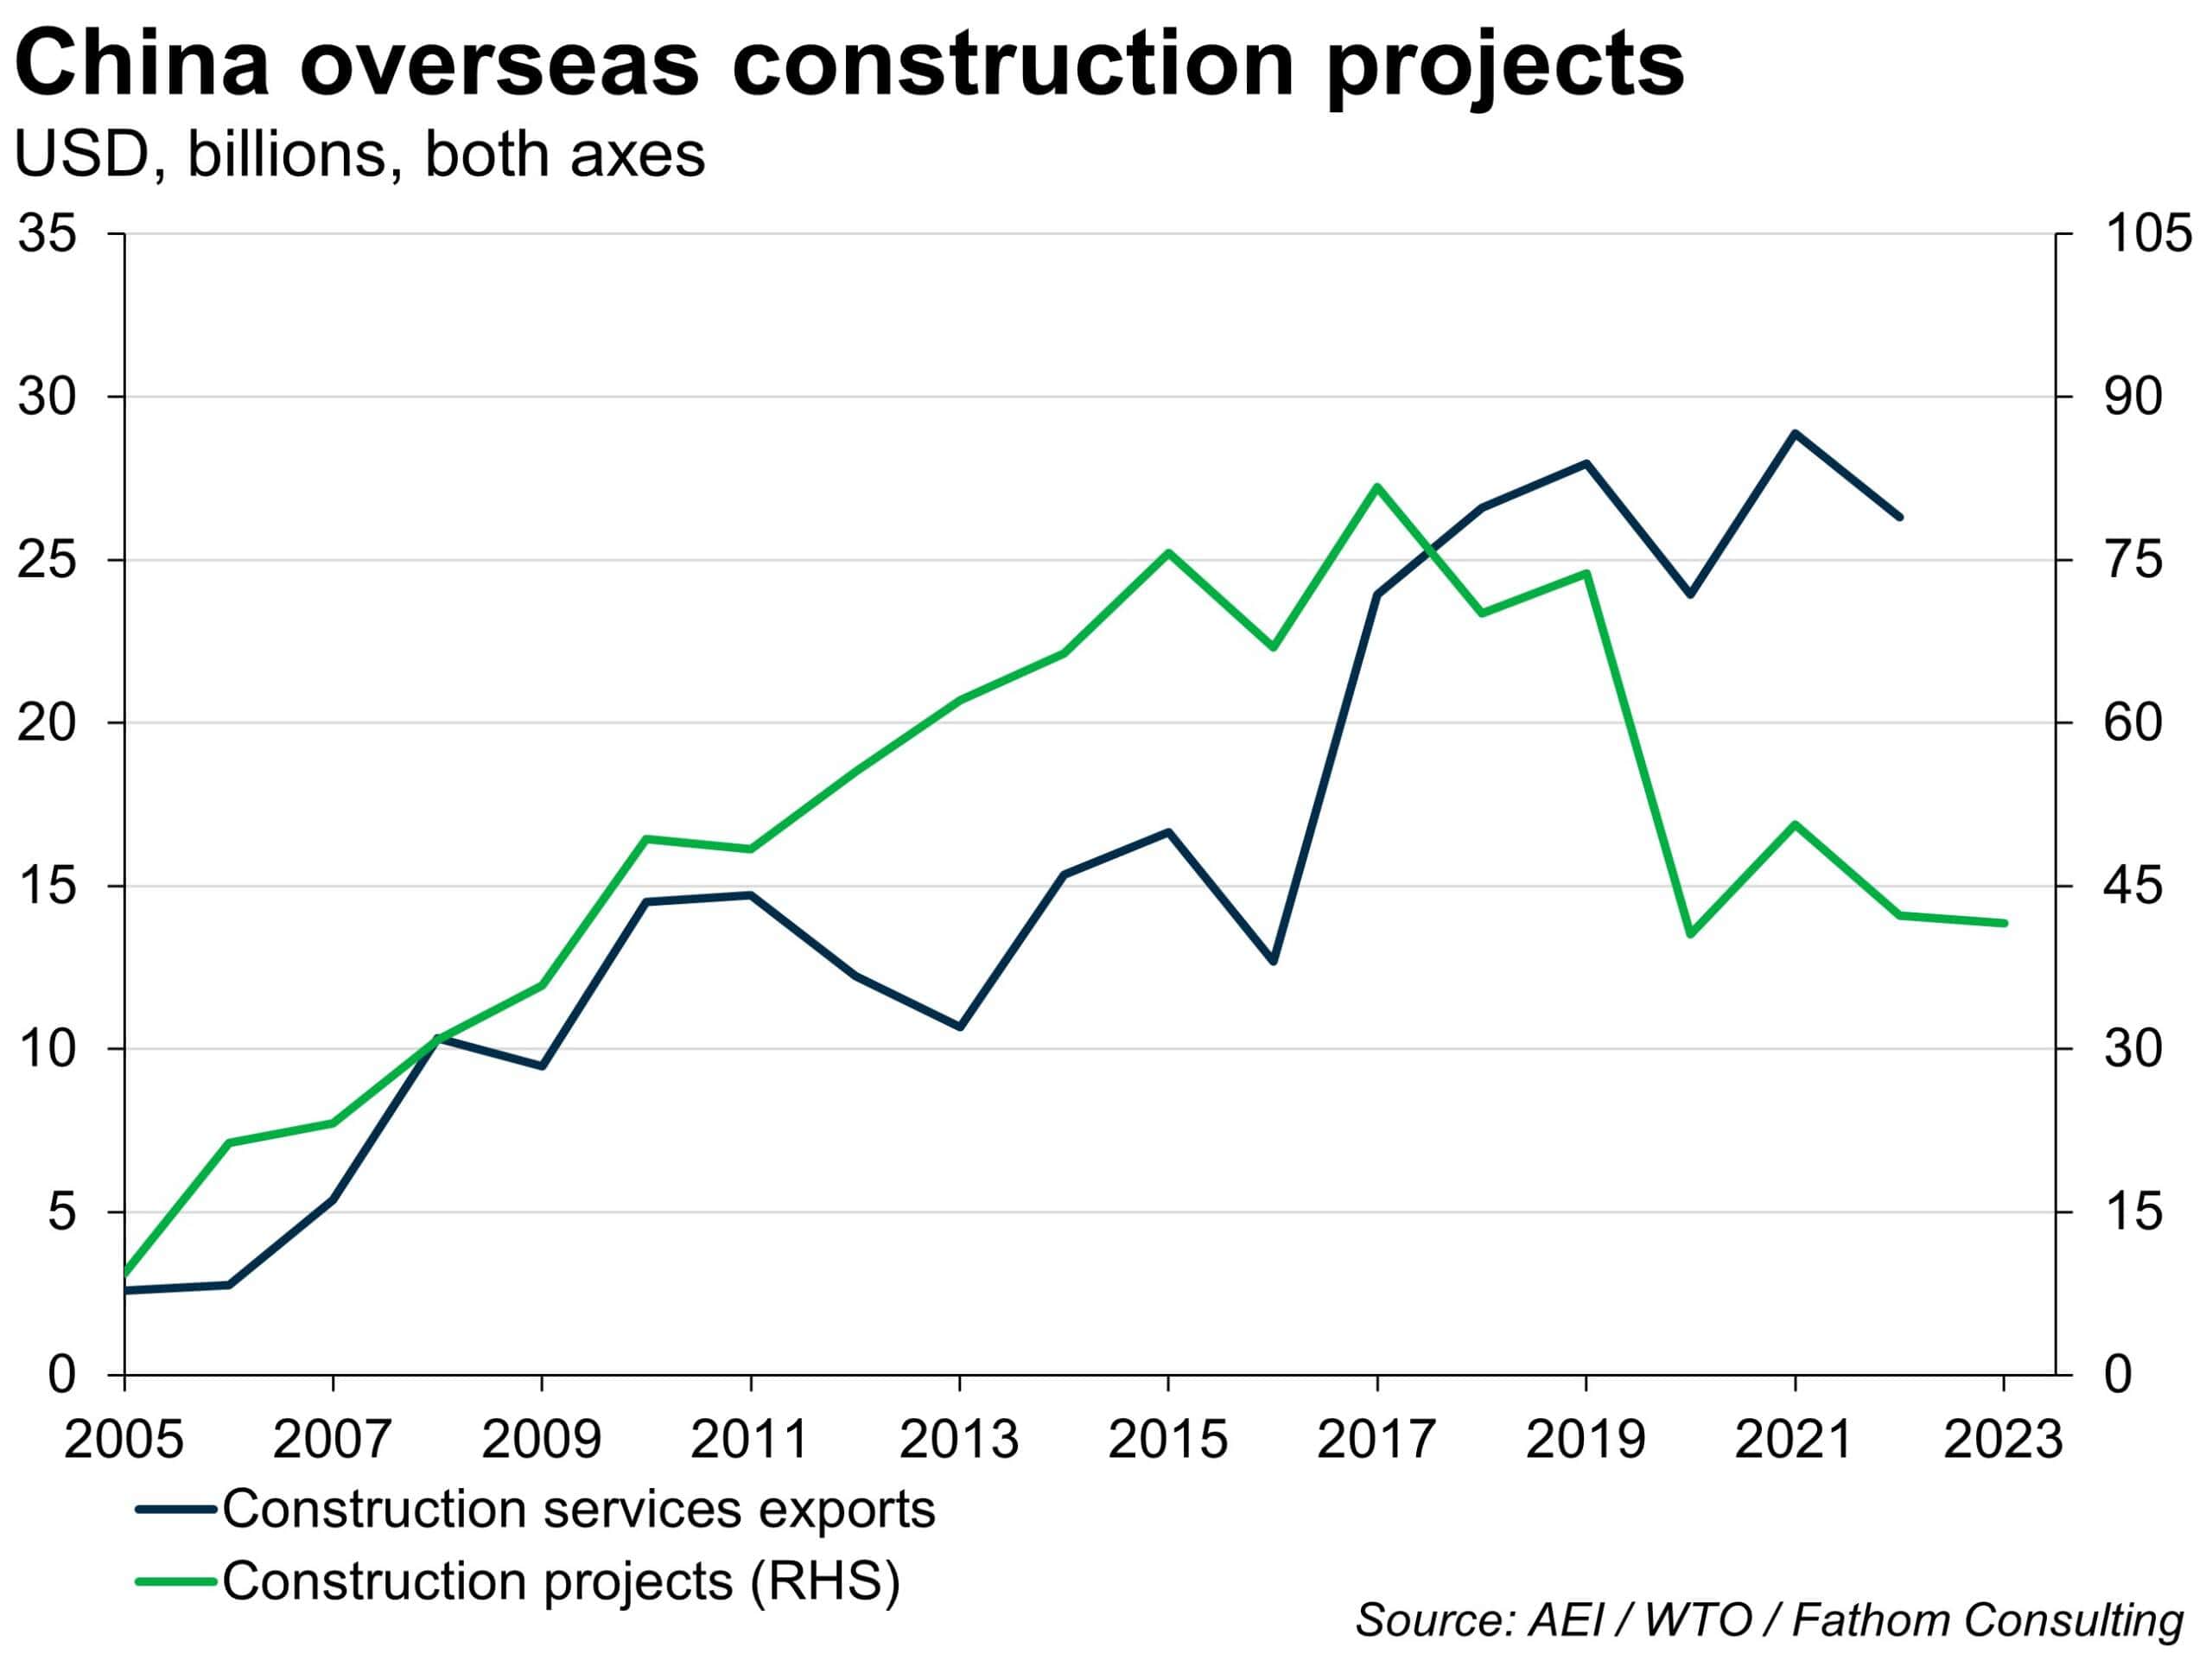 China overseas construction projects, compared to services exports, 2005 to date, in USD billions